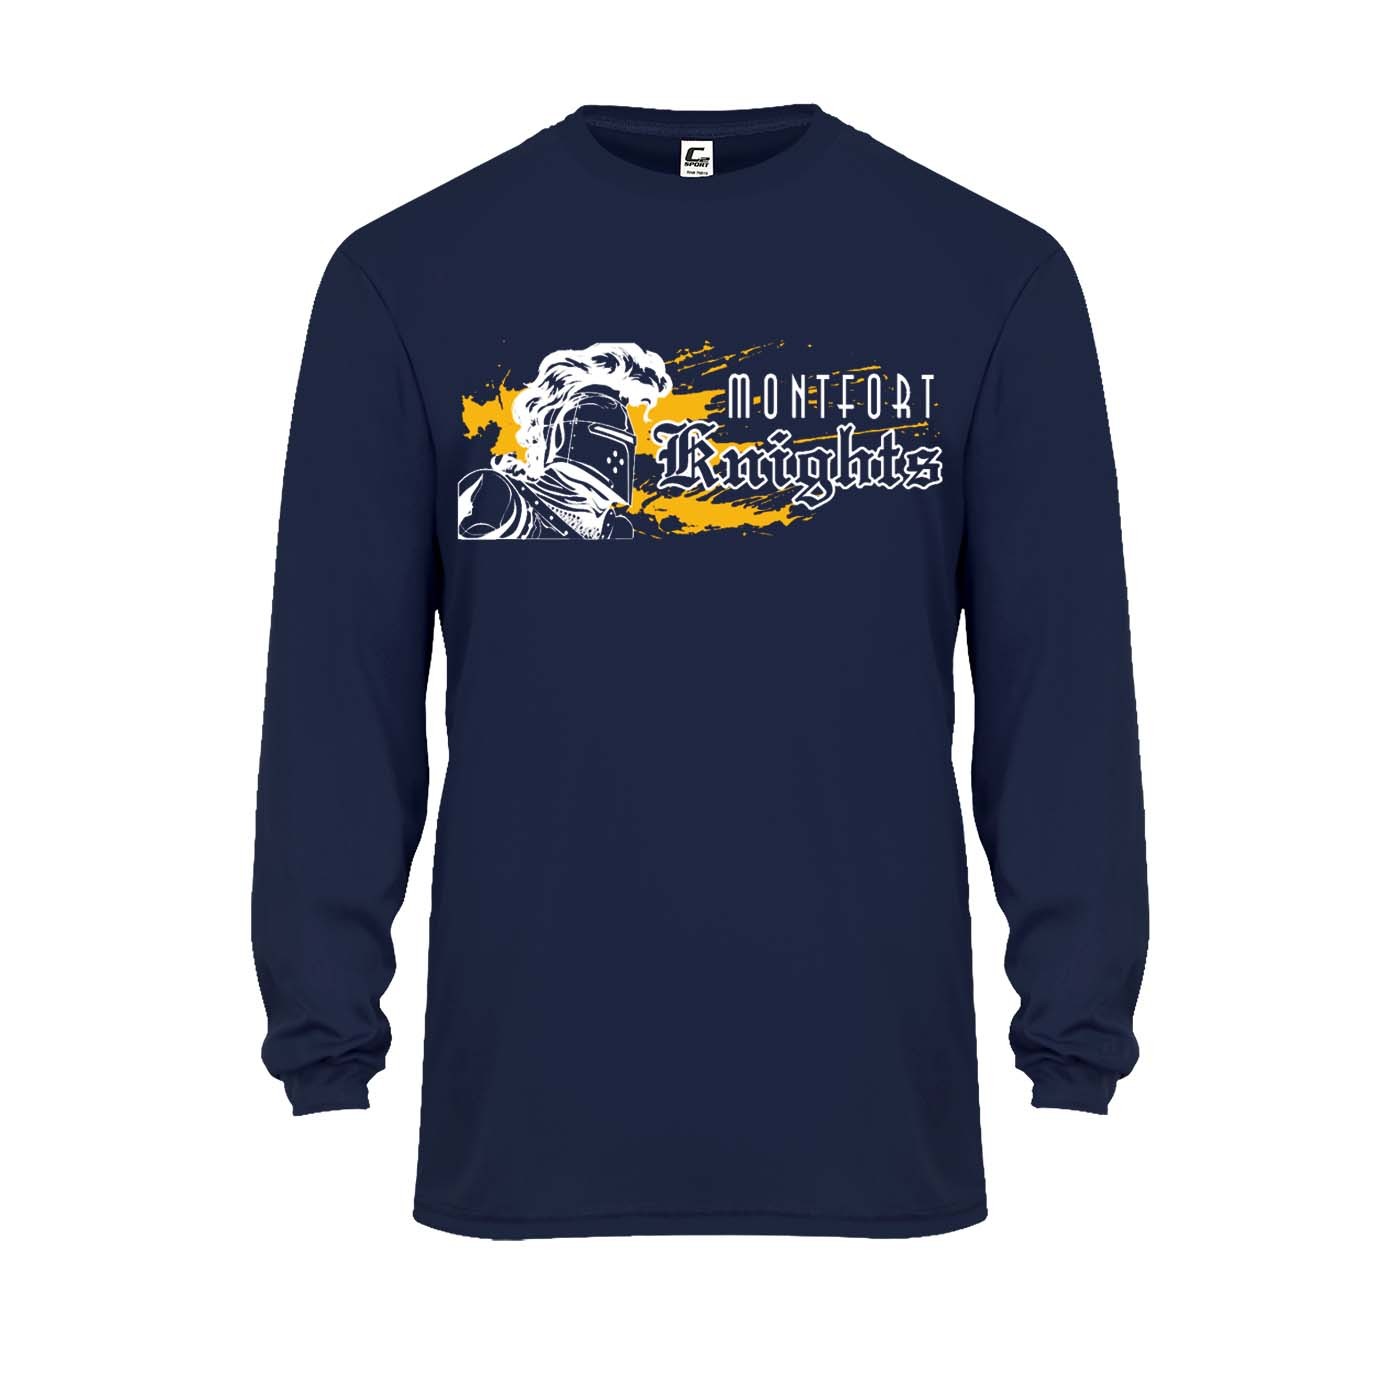 MONTFORT Spirit L/S Performance T-Shirt w/ White Knight Logo - Please Allow 2-3 Weeks for Delivery